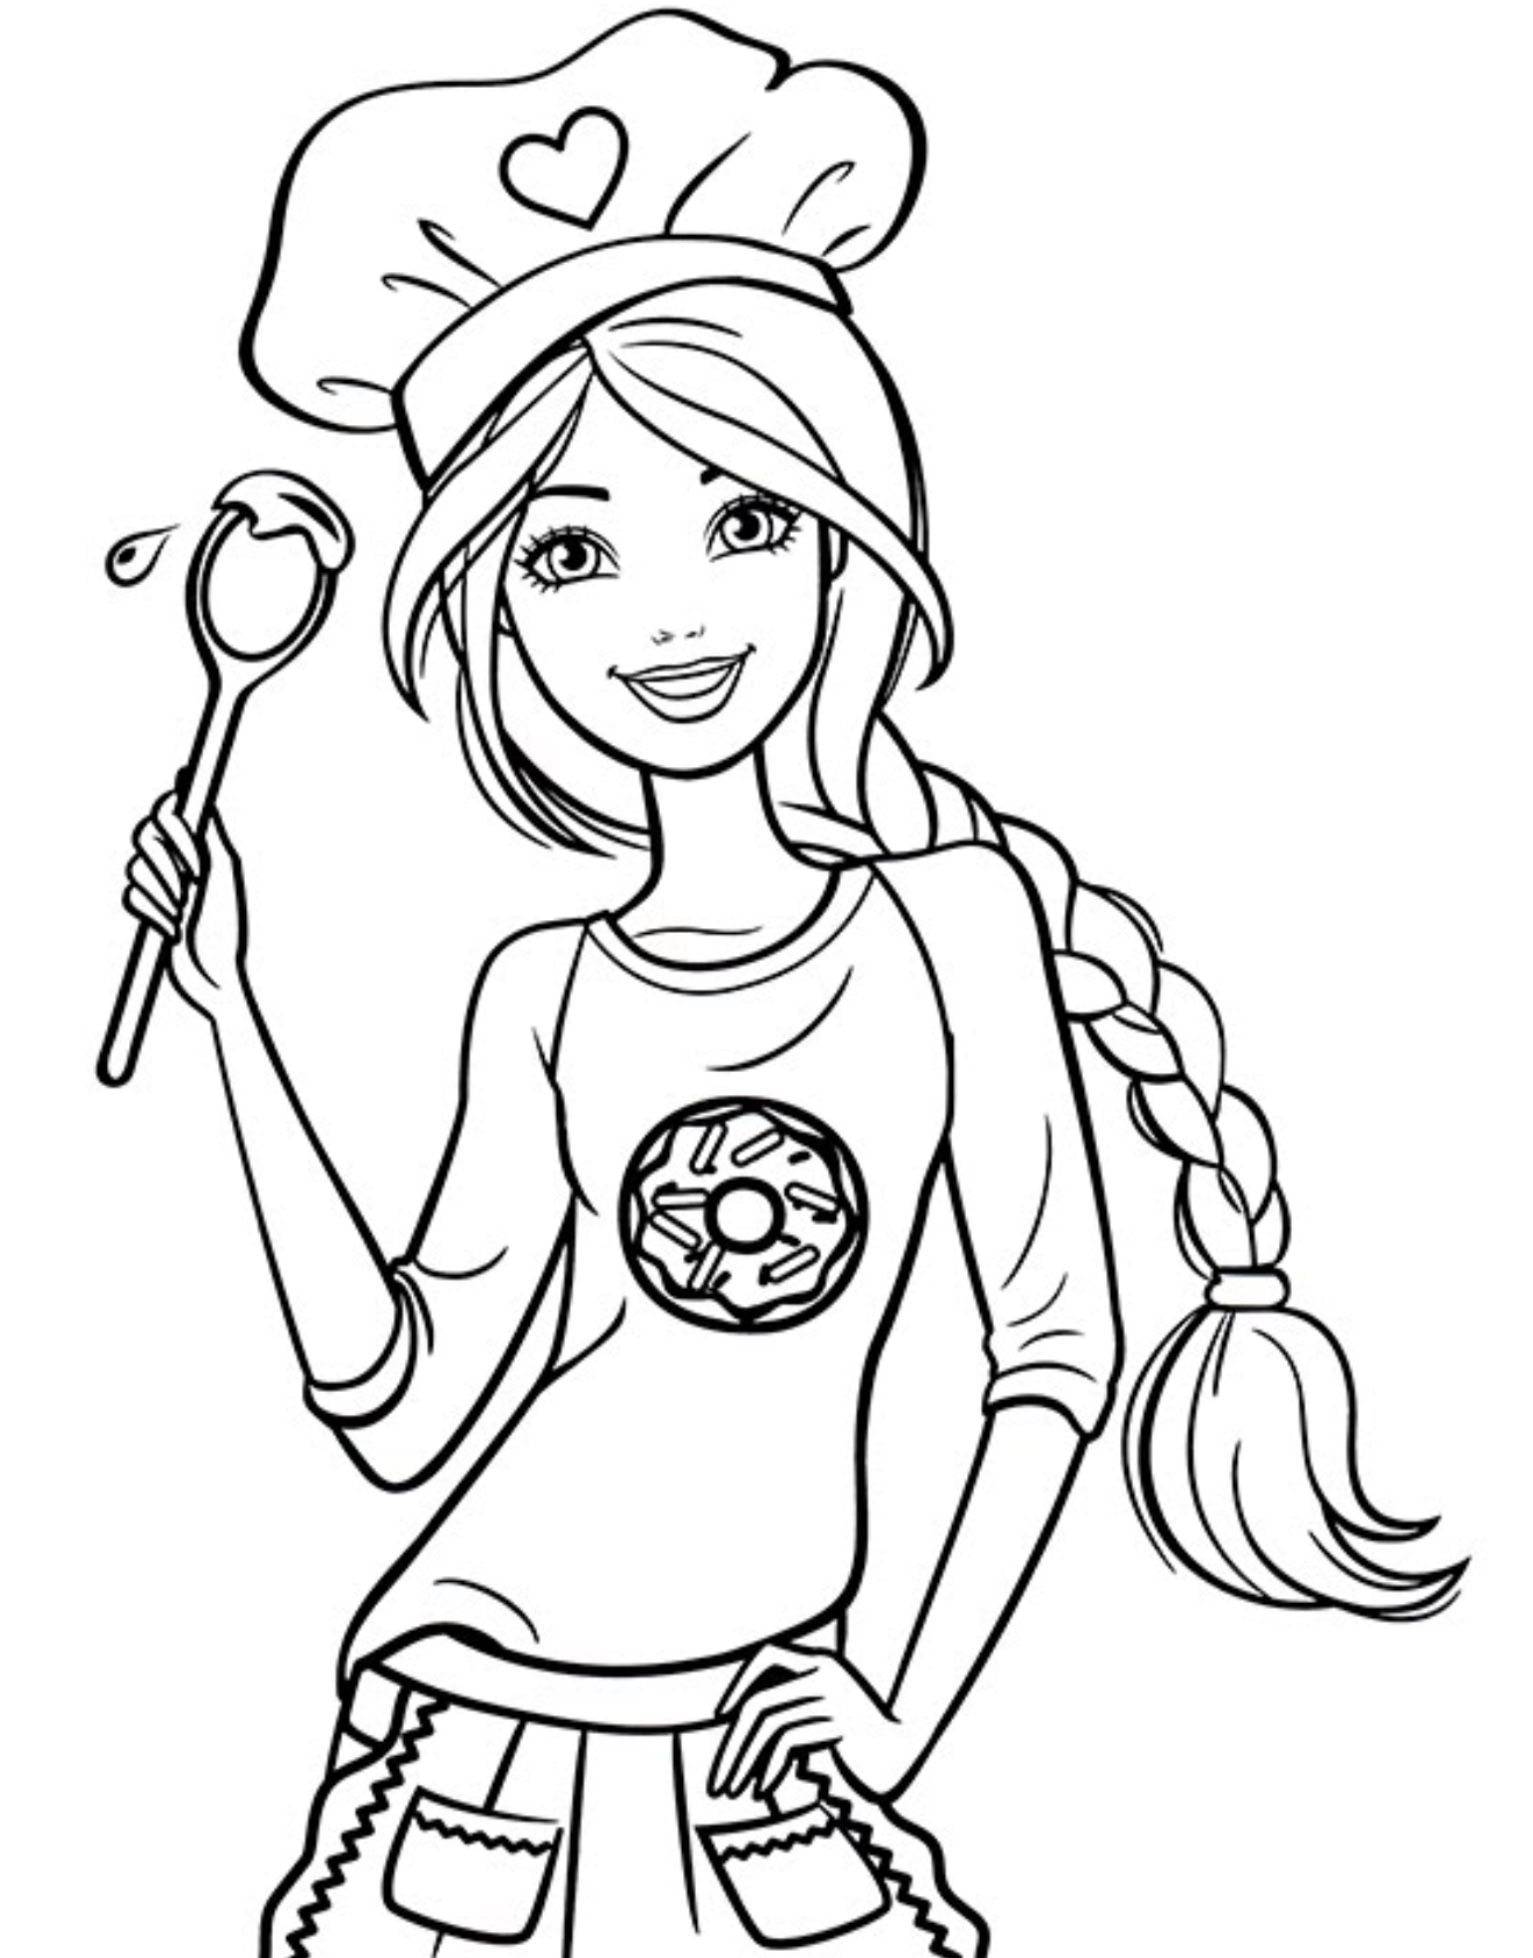 Chef Barbie Coloring Page Barbie coloring pages, Princess coloring